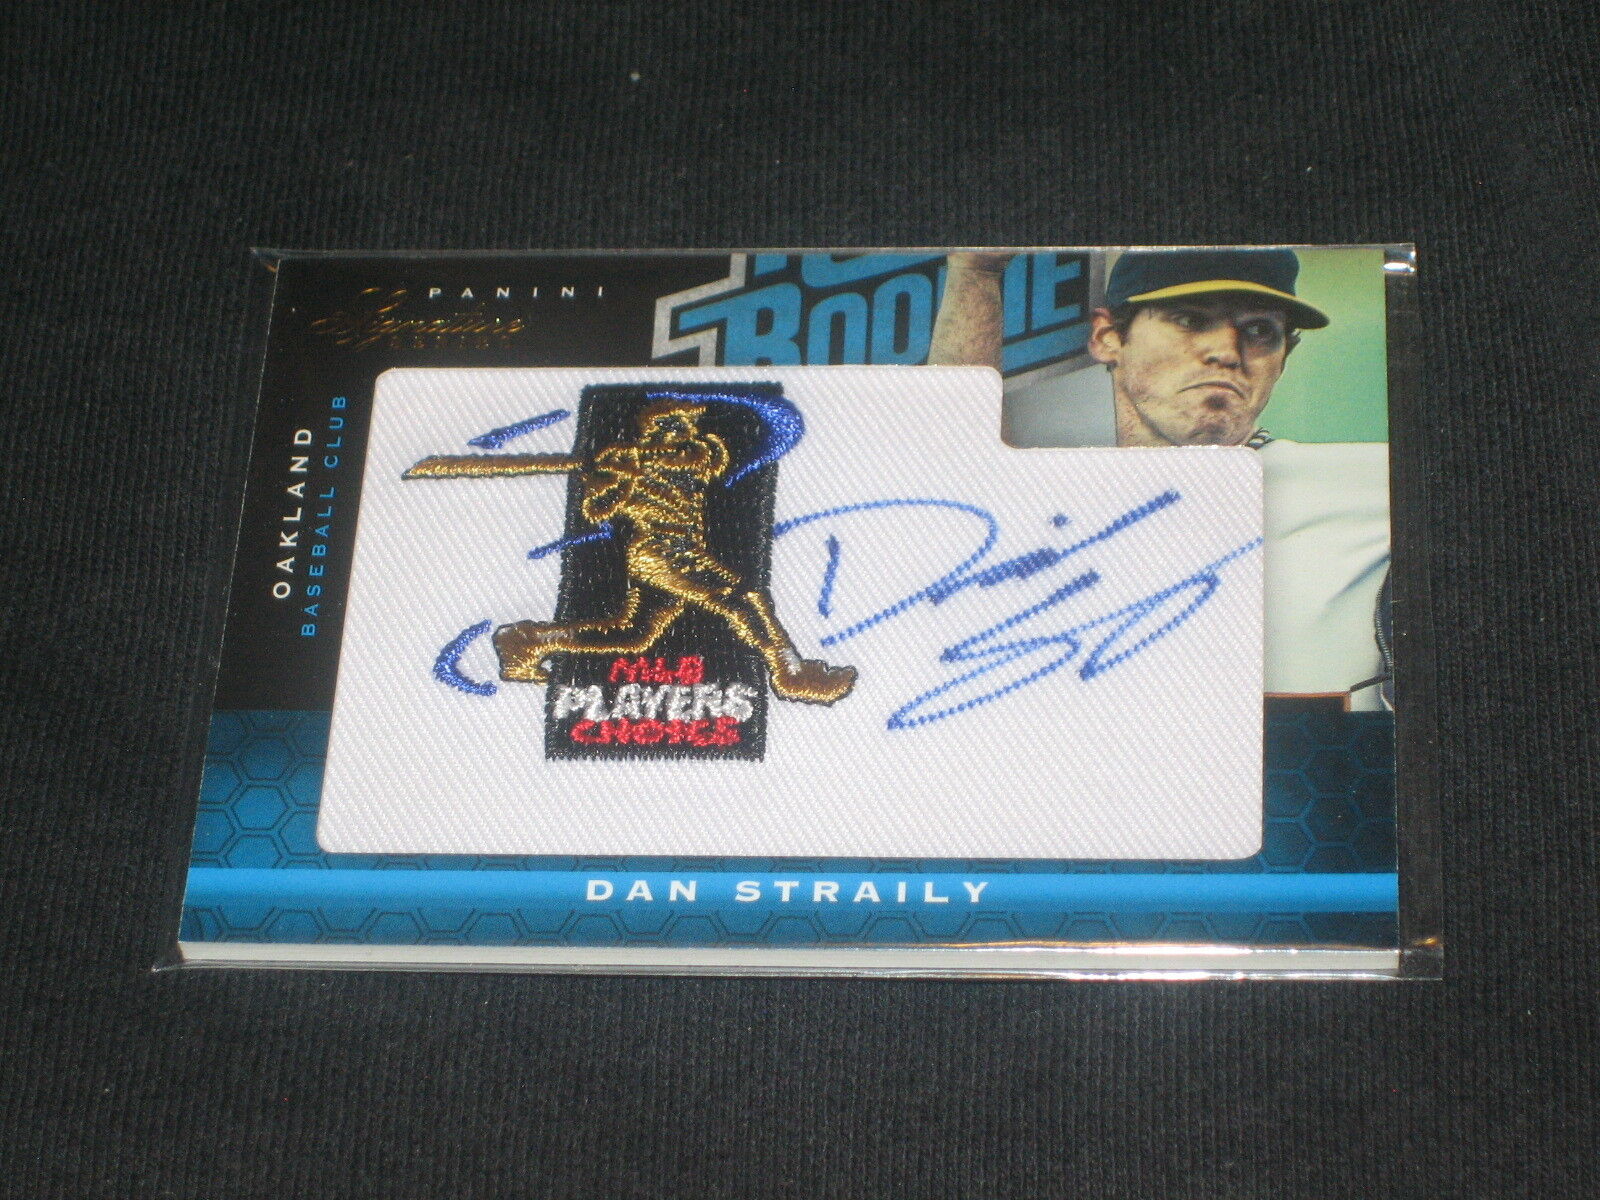 DAN STRAILY ROOKIE LEGEND CERTIFIED HAND SIGNED AUTOGRAPHED BASEBALL CARD /99. rookie card picture